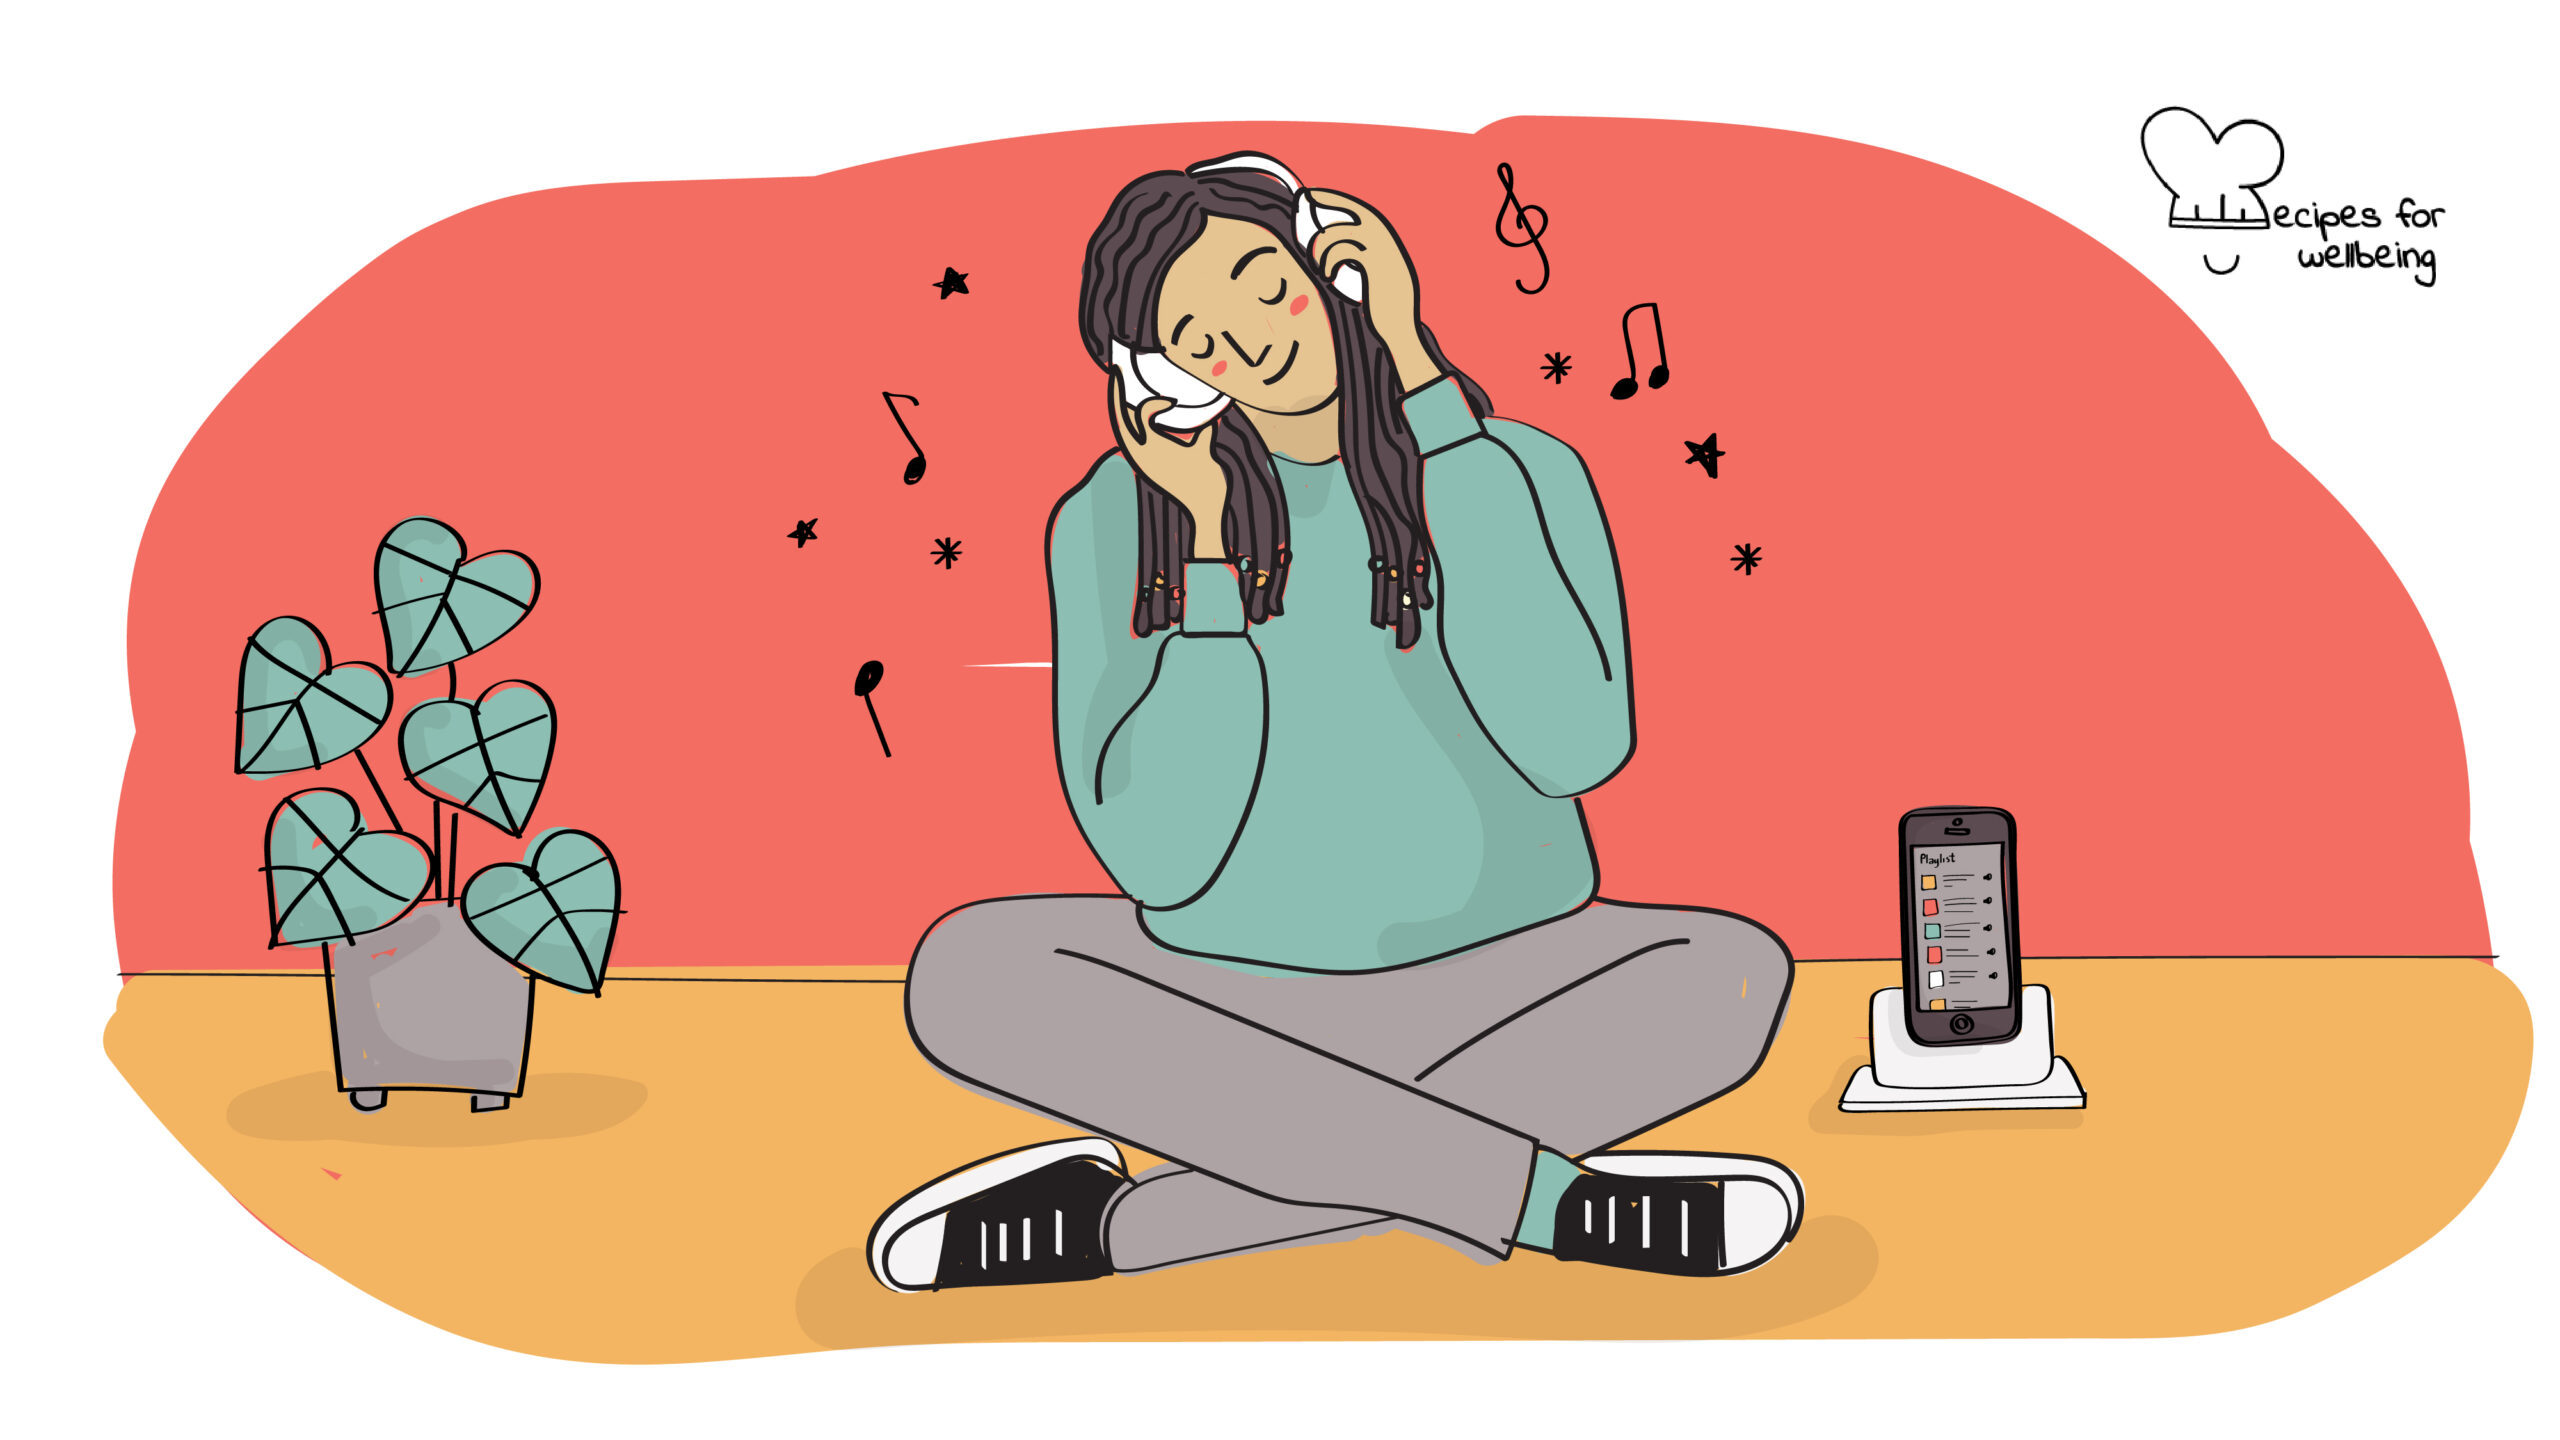 Illustration of a person sitting crosslegged while listening to music. © Recipes for Wellbeing